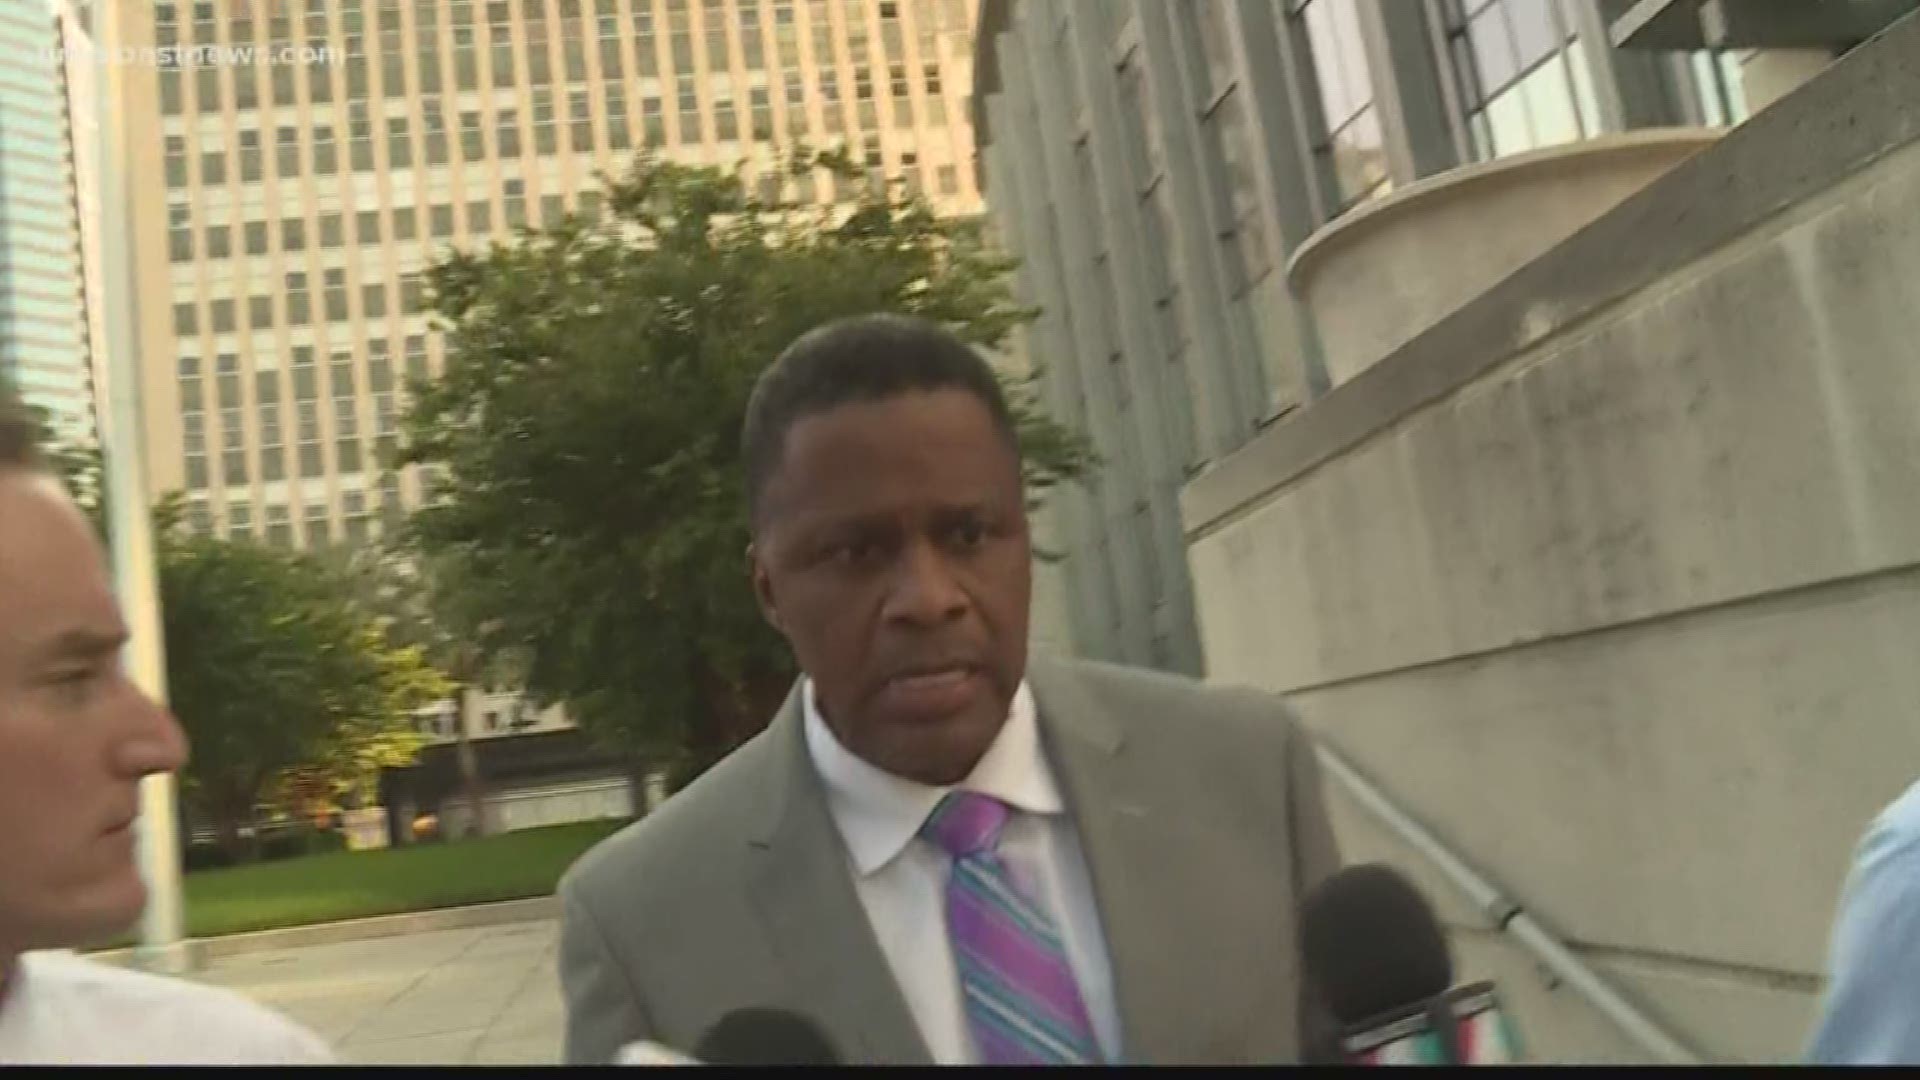 “There was not sufficient evidence,” argued an attorney for Reggie Brown, who a jury found guilty of 33 federal crimes.